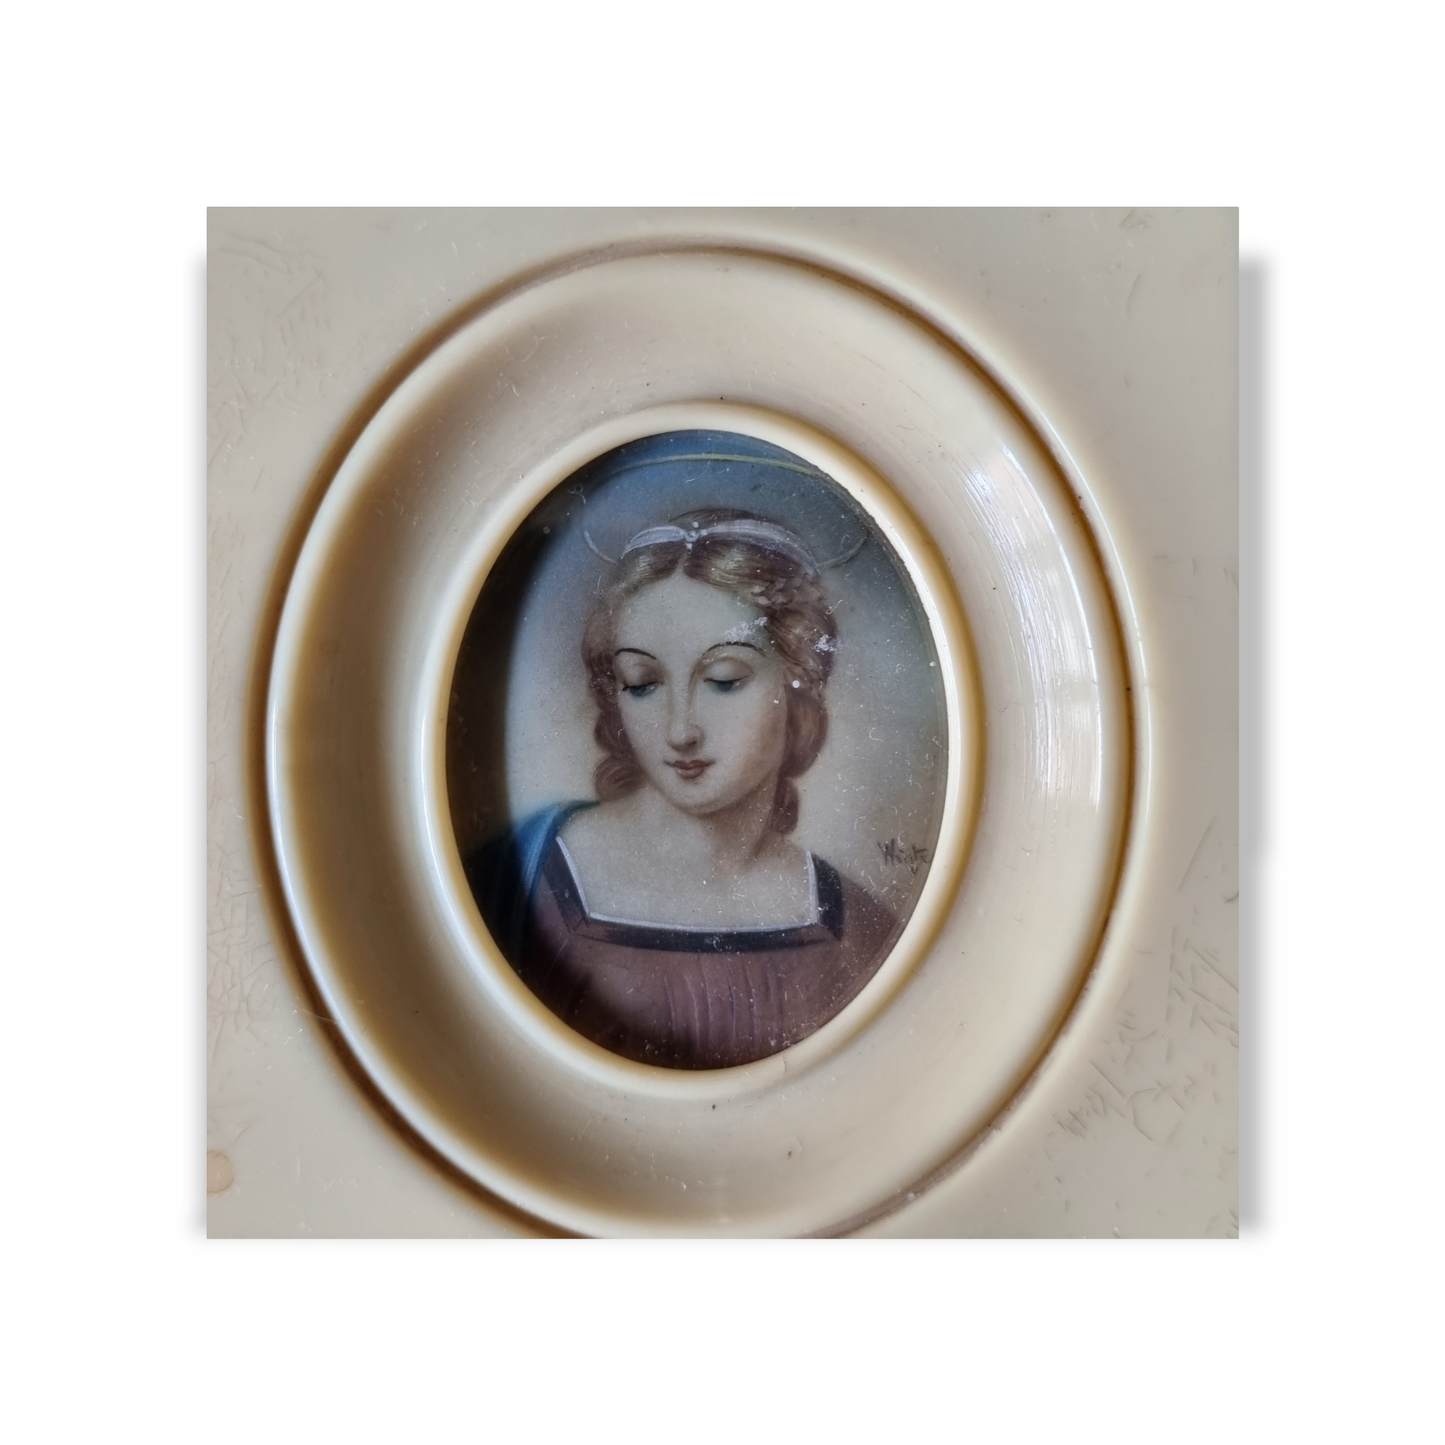 Follower of Raphael - Late 19th Century Italian School Antique Portrait Miniature of The Madonna of the Goldfinch or Madonna del Cardellino